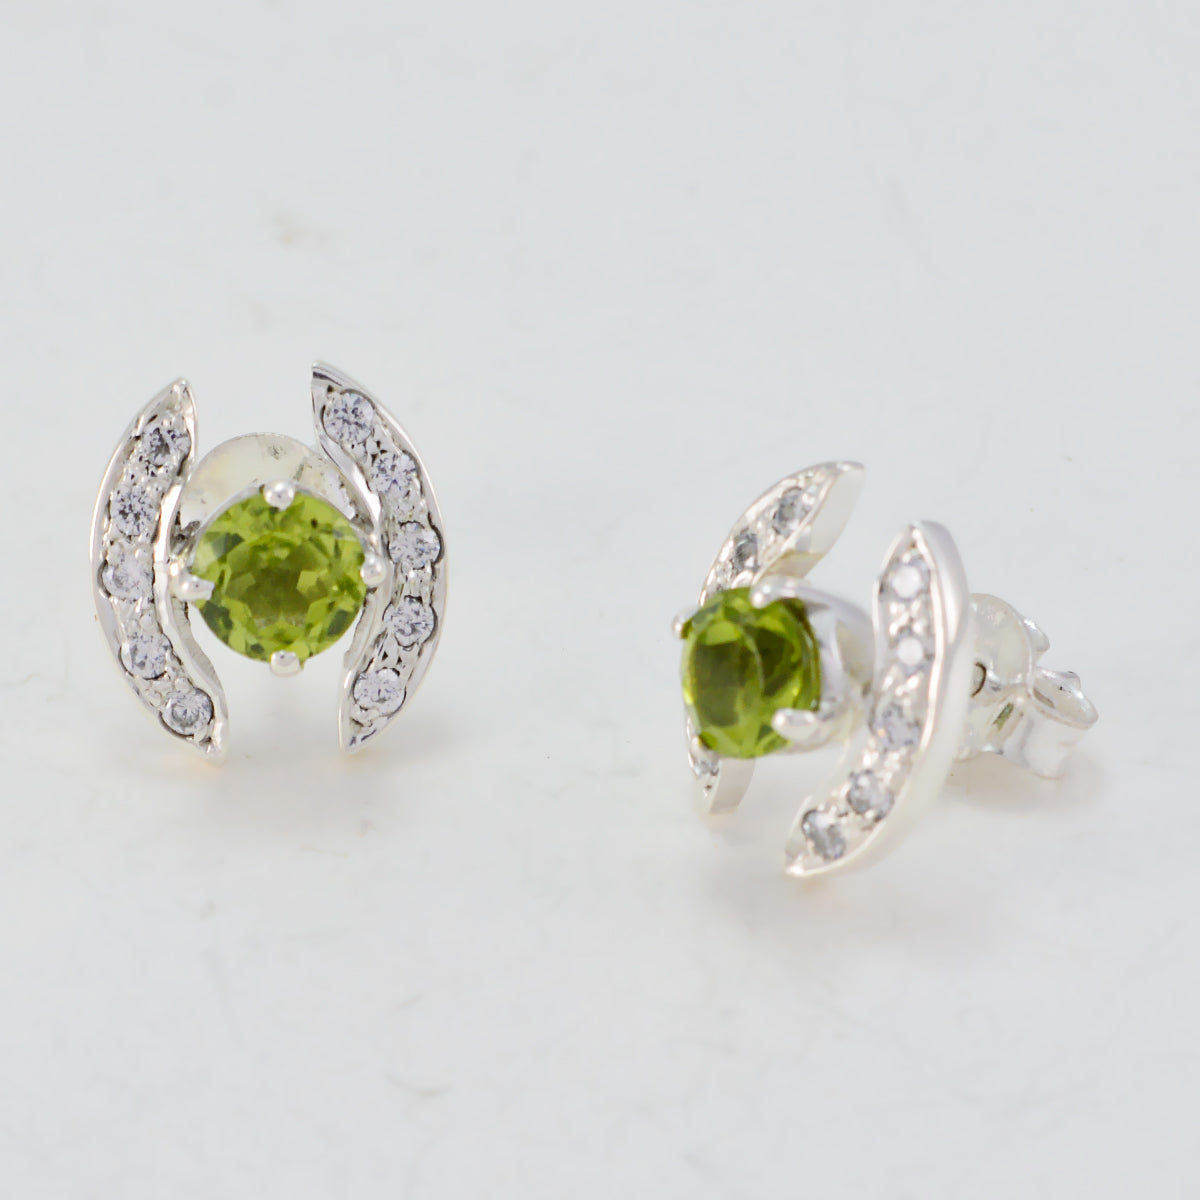 Riyo Genuine Gems oval Faceted Green Peridot Silver Earring mother's day gift